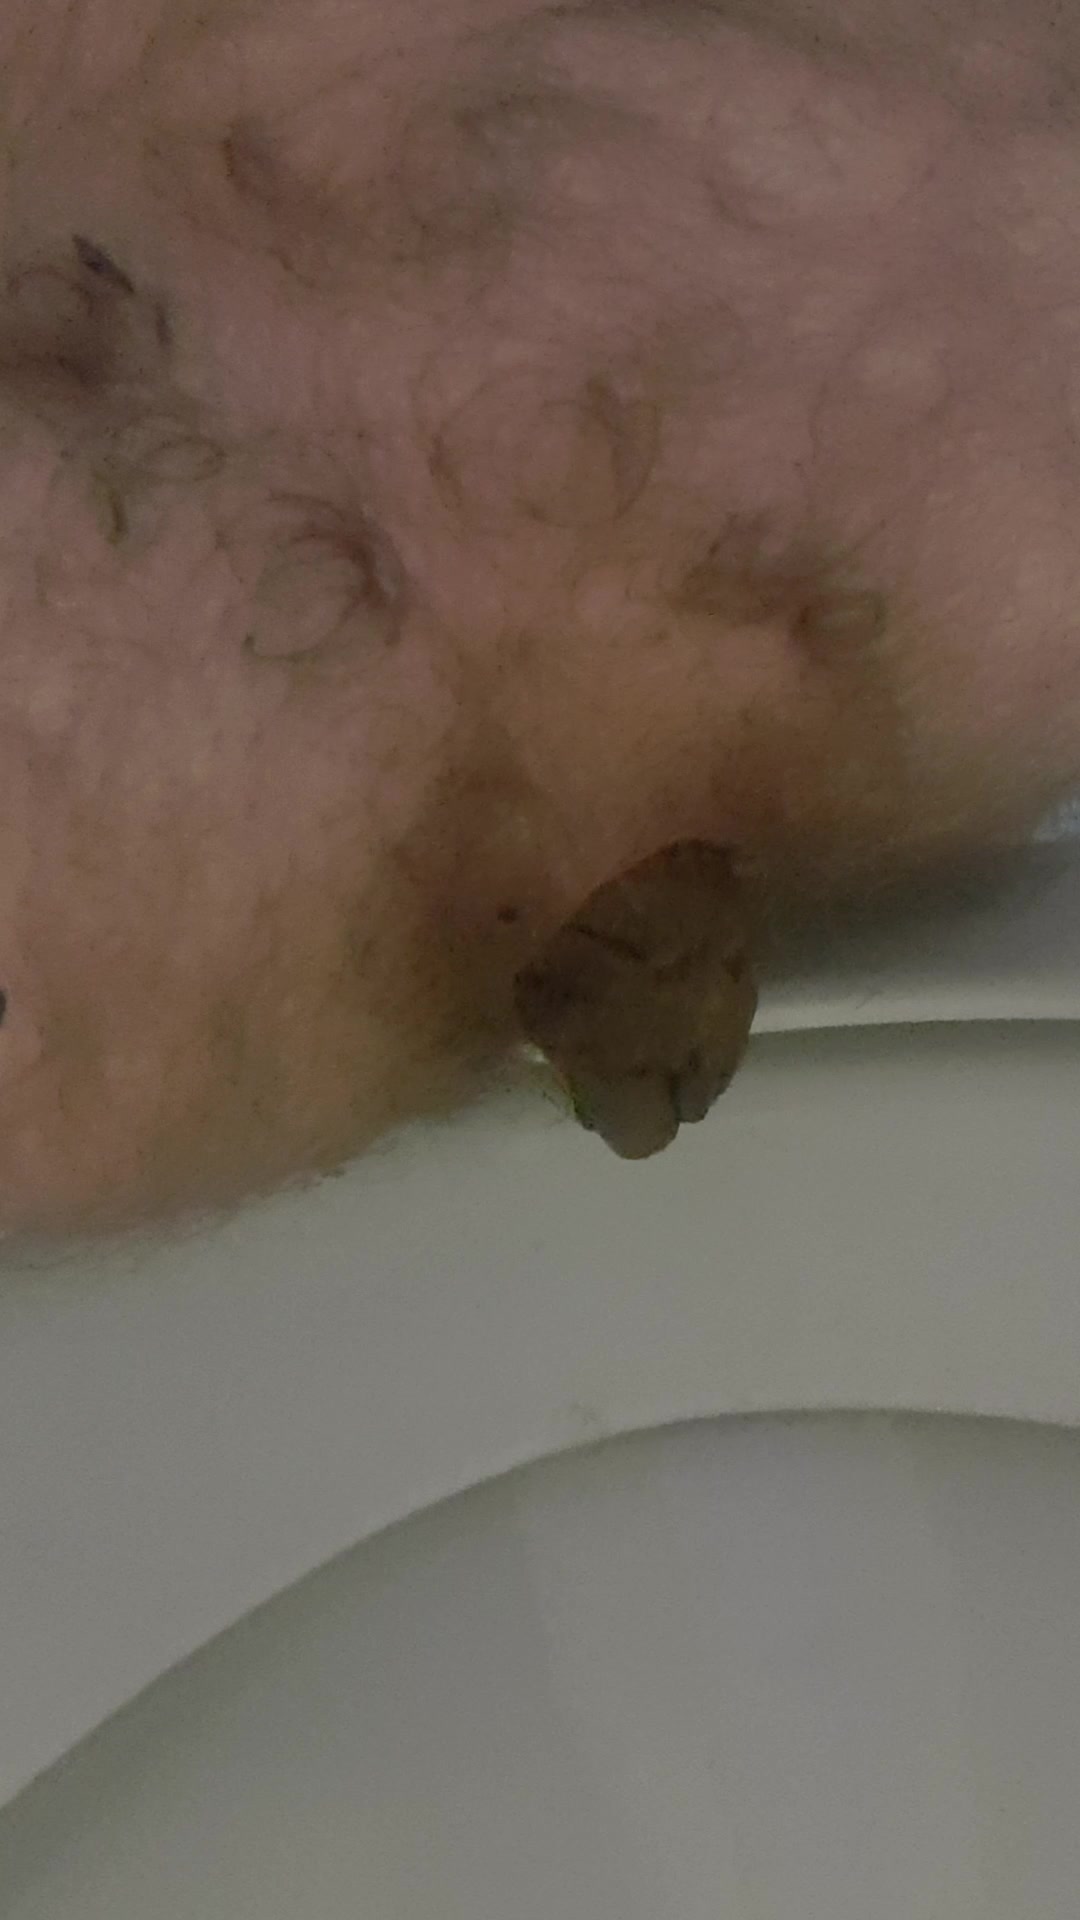 Today's poop for you guys